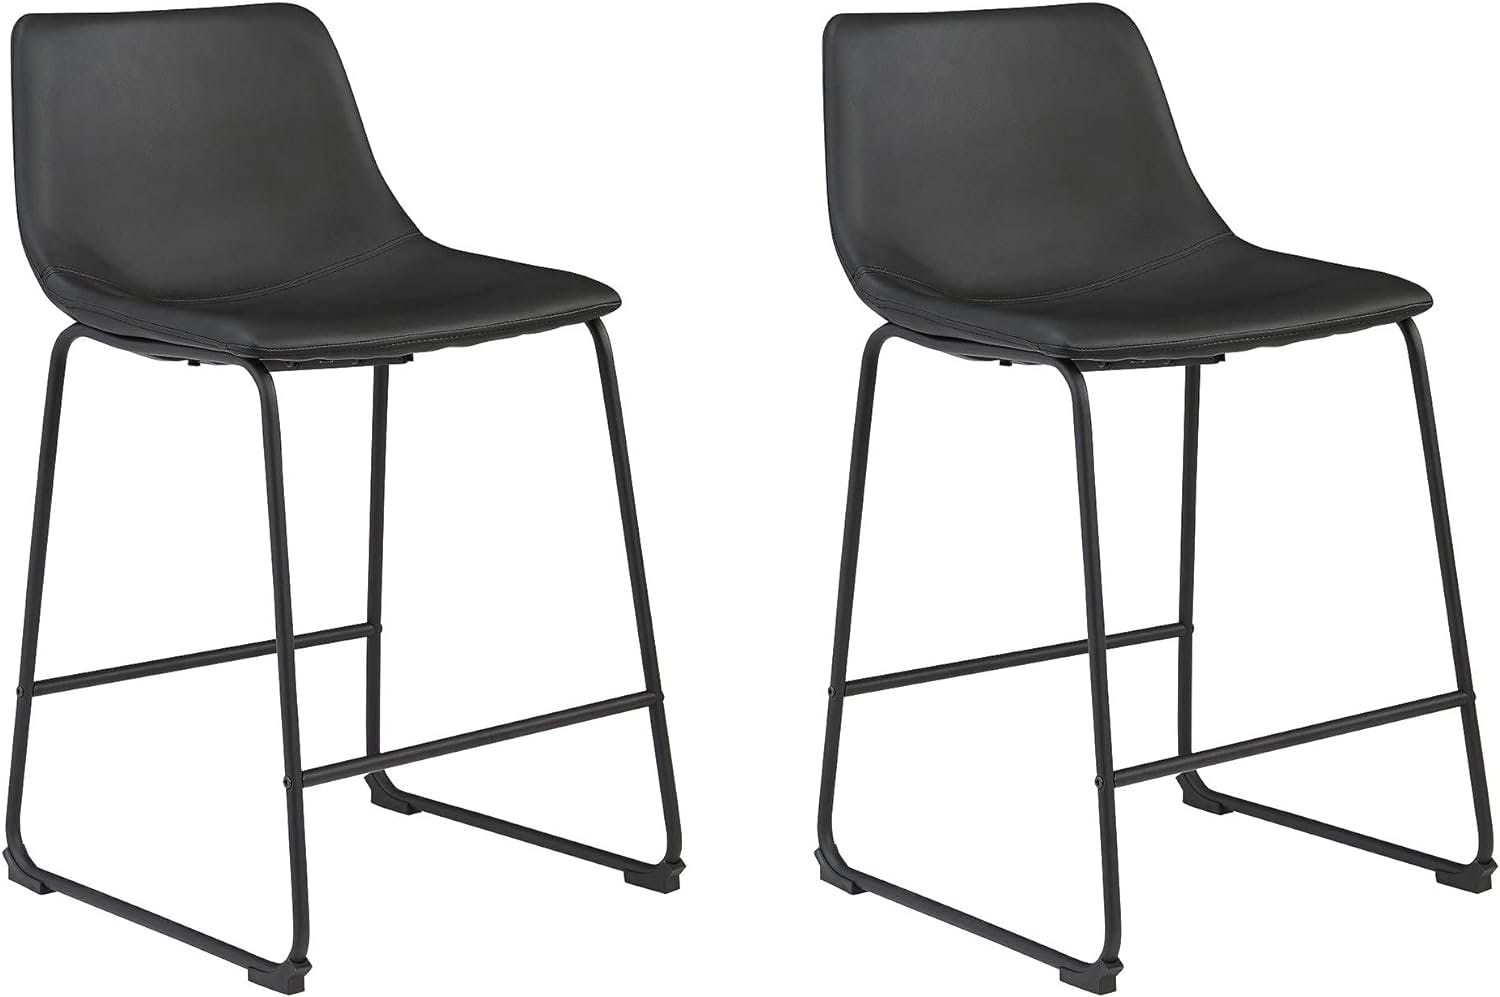 Transitional Black Leather Counter Stool with Metal Base